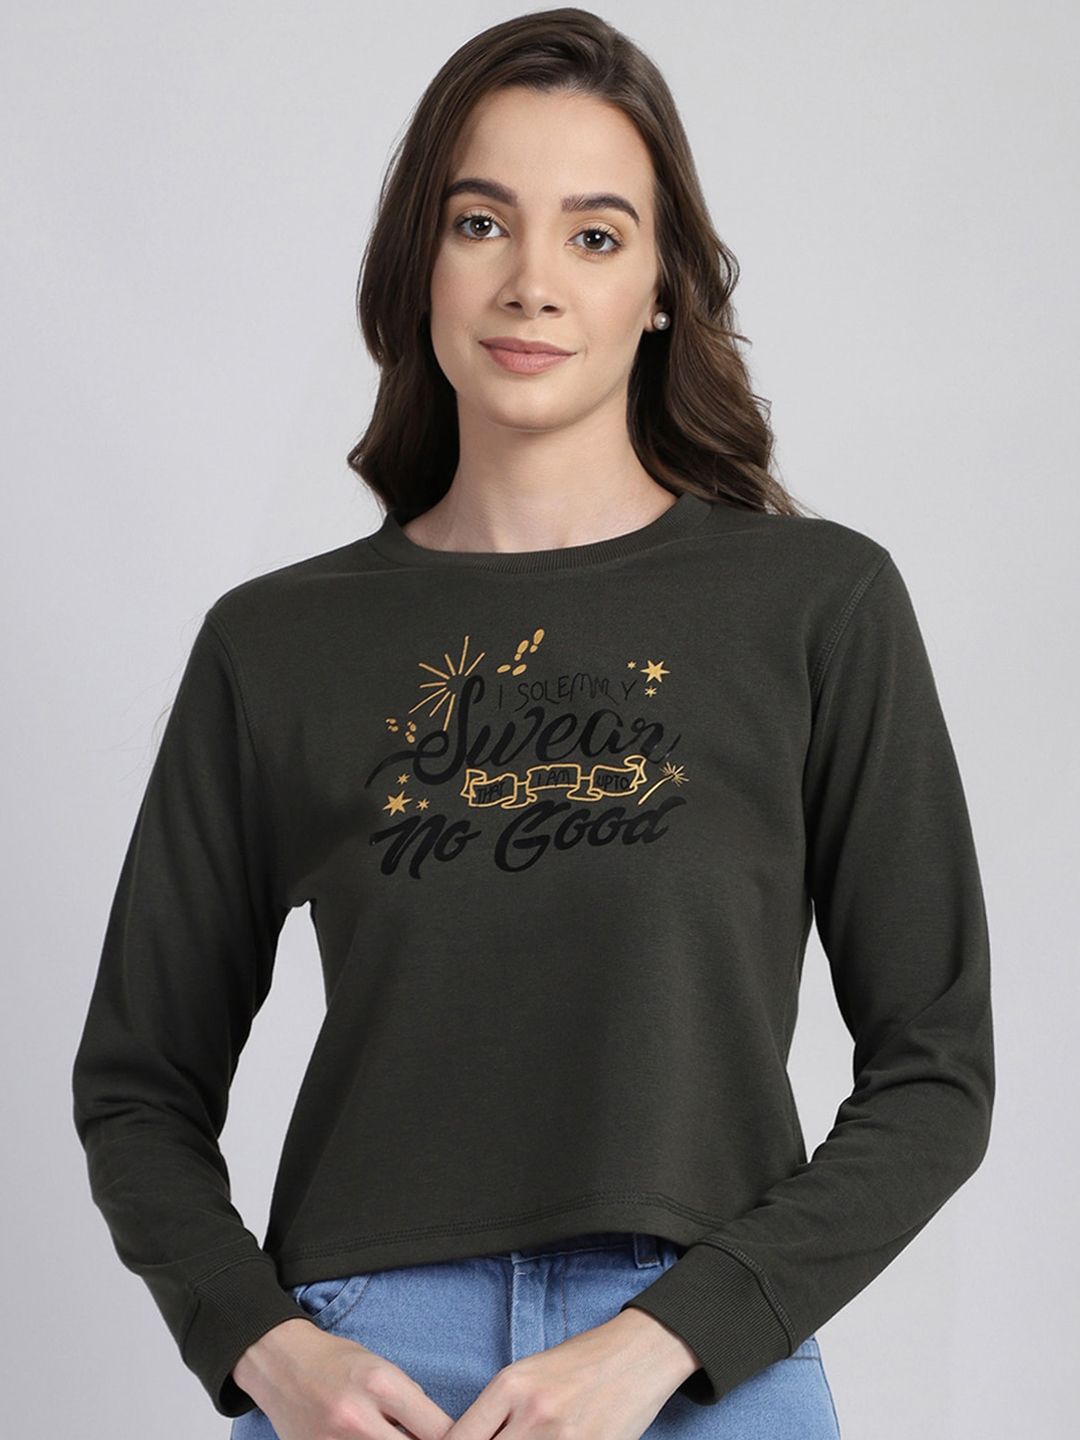 Free Authority Harry Potter Featured Women Olive Green Printed Sweatshirt Price in India